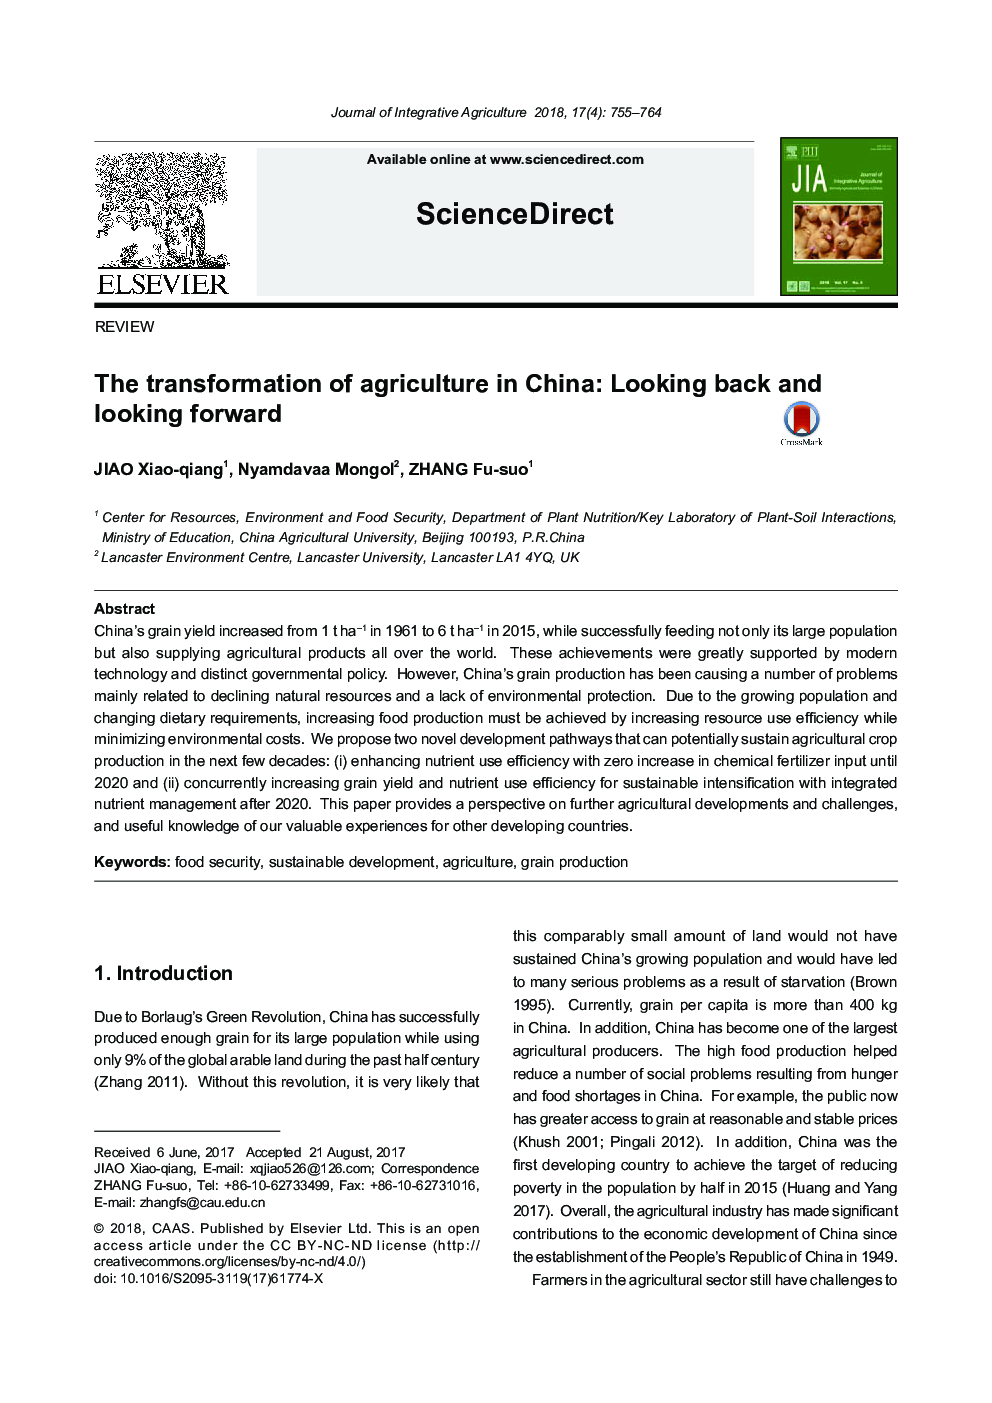 The transformation of agriculture in China: Looking back and looking forward